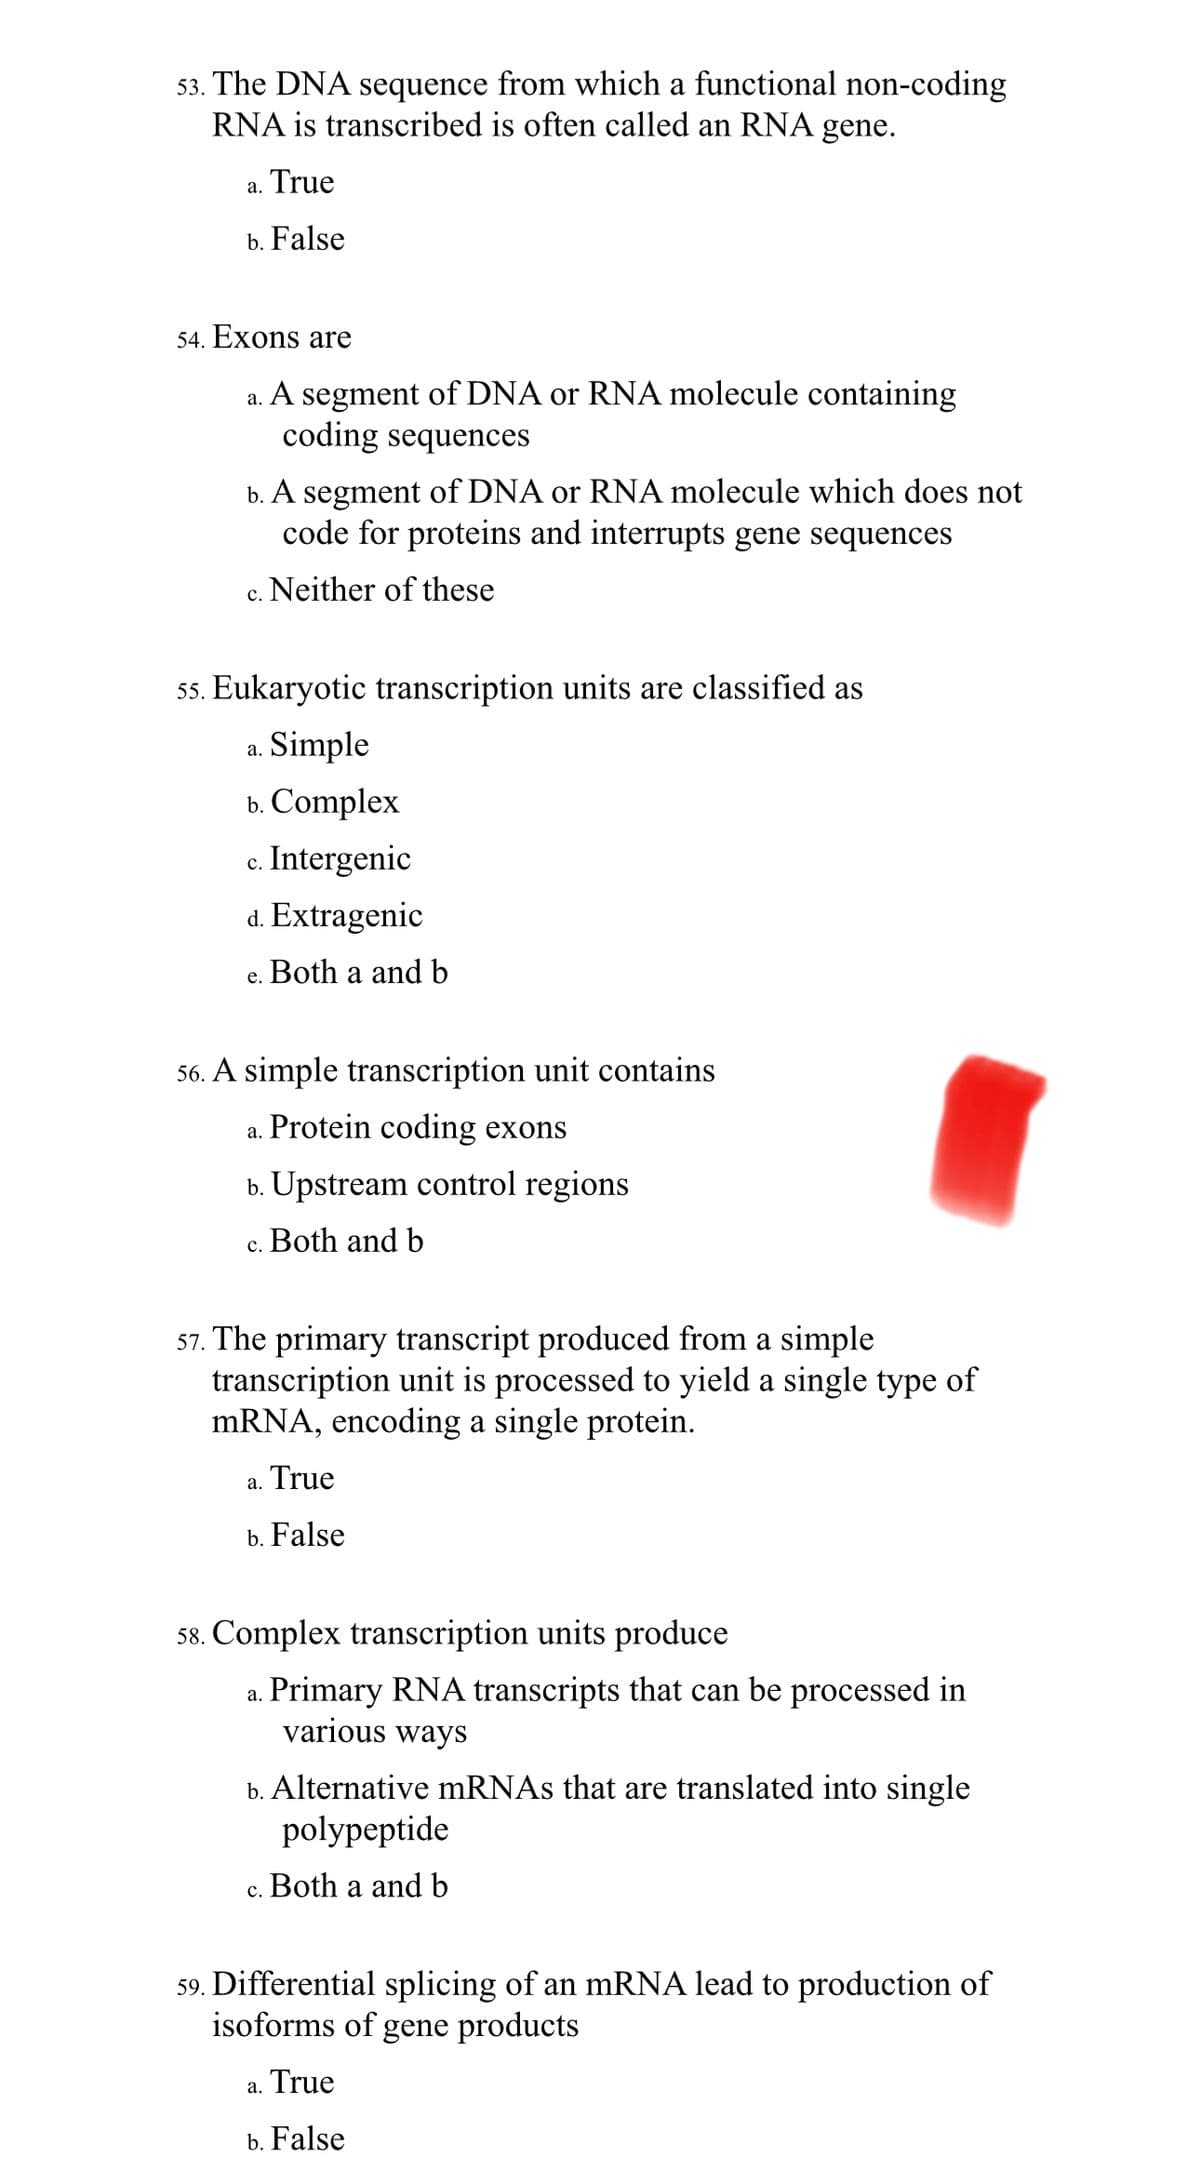 53. The DNA sequence from which a functional non-coding
RNA is transcribed is often called an RNA gene.
a. True
b. False
54. Exons are
a.
A segment of DNA or RNA molecule containing
coding sequences
b. A segment of DNA or RNA molecule which does not
code for proteins and interrupts gene sequences
Neither of these
C.
55. Eukaryotic transcription units are classified as
Simple
b. Complex
Intergenic
d. Extragenic
e. Both a and b
a.
C.
56. A simple transcription unit contains
a. Protein coding exons
b. Upstream control regions
C.
57. The primary transcript produced from a simple
transcription unit is processed to yield a single type of
mRNA, encoding a single protein.
Both and b
True
b. False
a.
58. Complex transcription units produce
a. Primary RNA transcripts that can be processed in
various ways
b. Alternative mRNAs that are translated into single
polypeptide
c. Both a and b
59. Differential splicing of an mRNA lead to production of
isoforms of gene products
True
b. False
a.